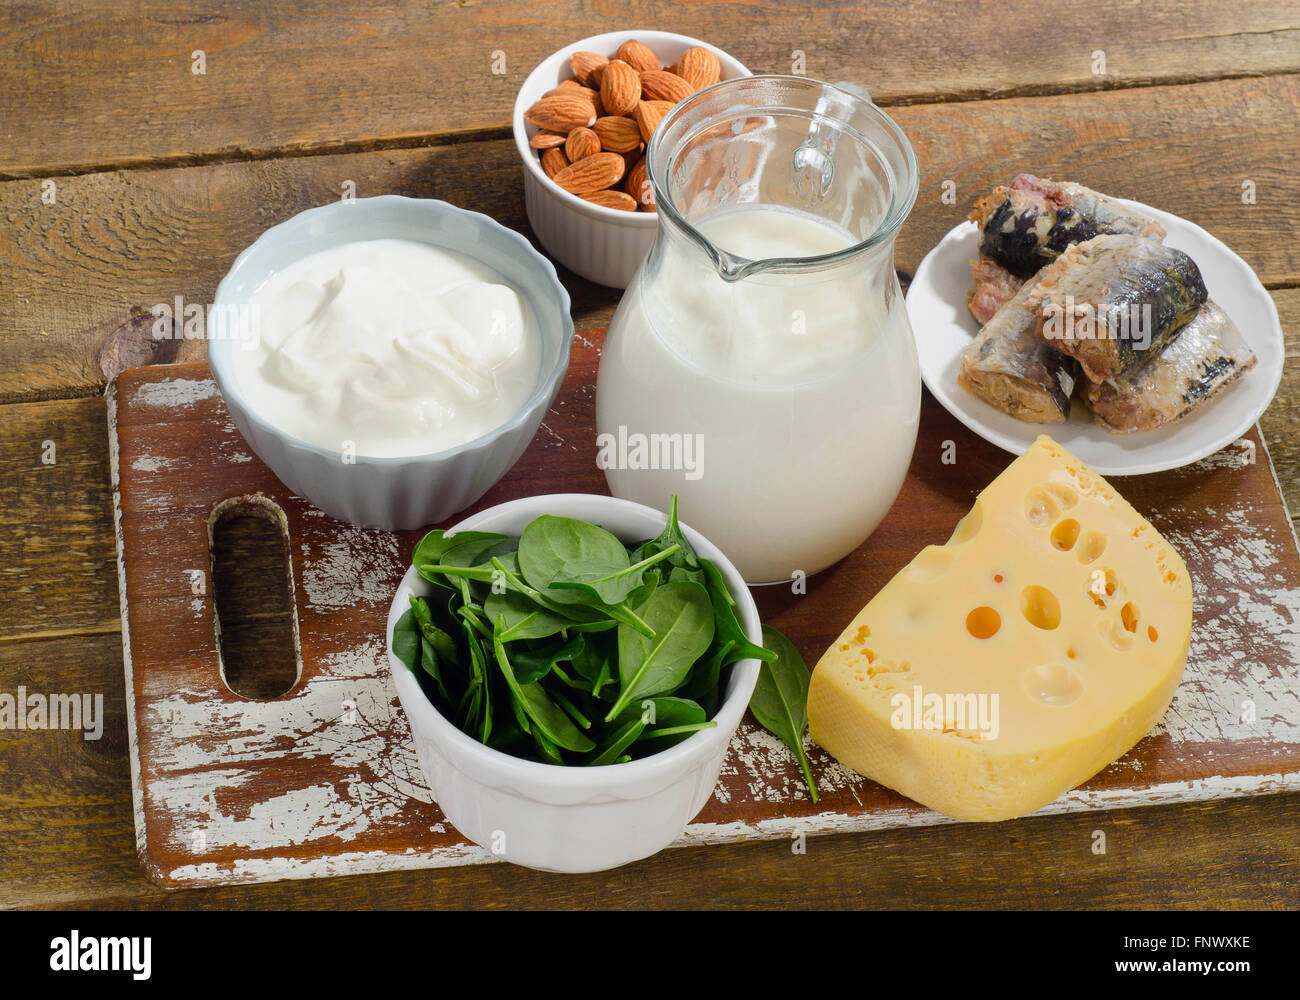 Food Sources of Calcium. Healthy eating. Stock Photo